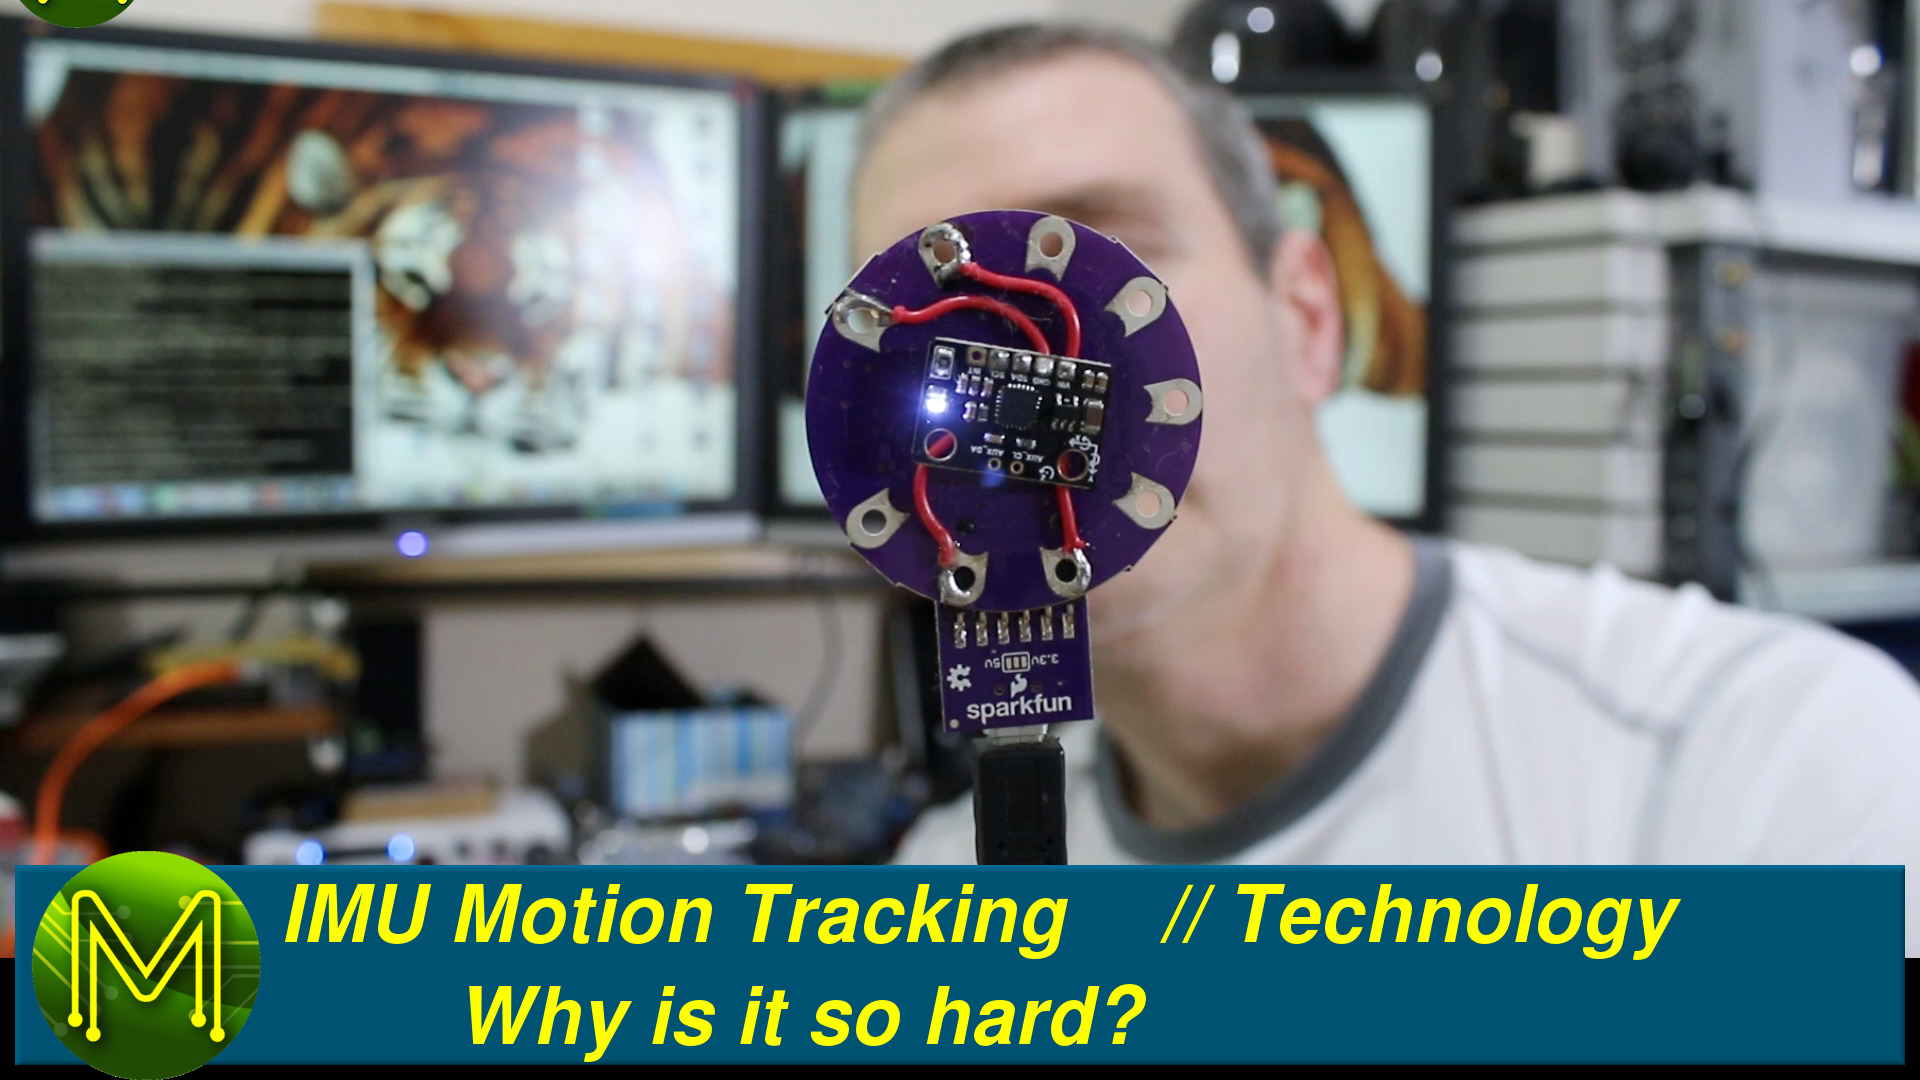 IMU motion tracking: Why is it so hard? - Tutorial